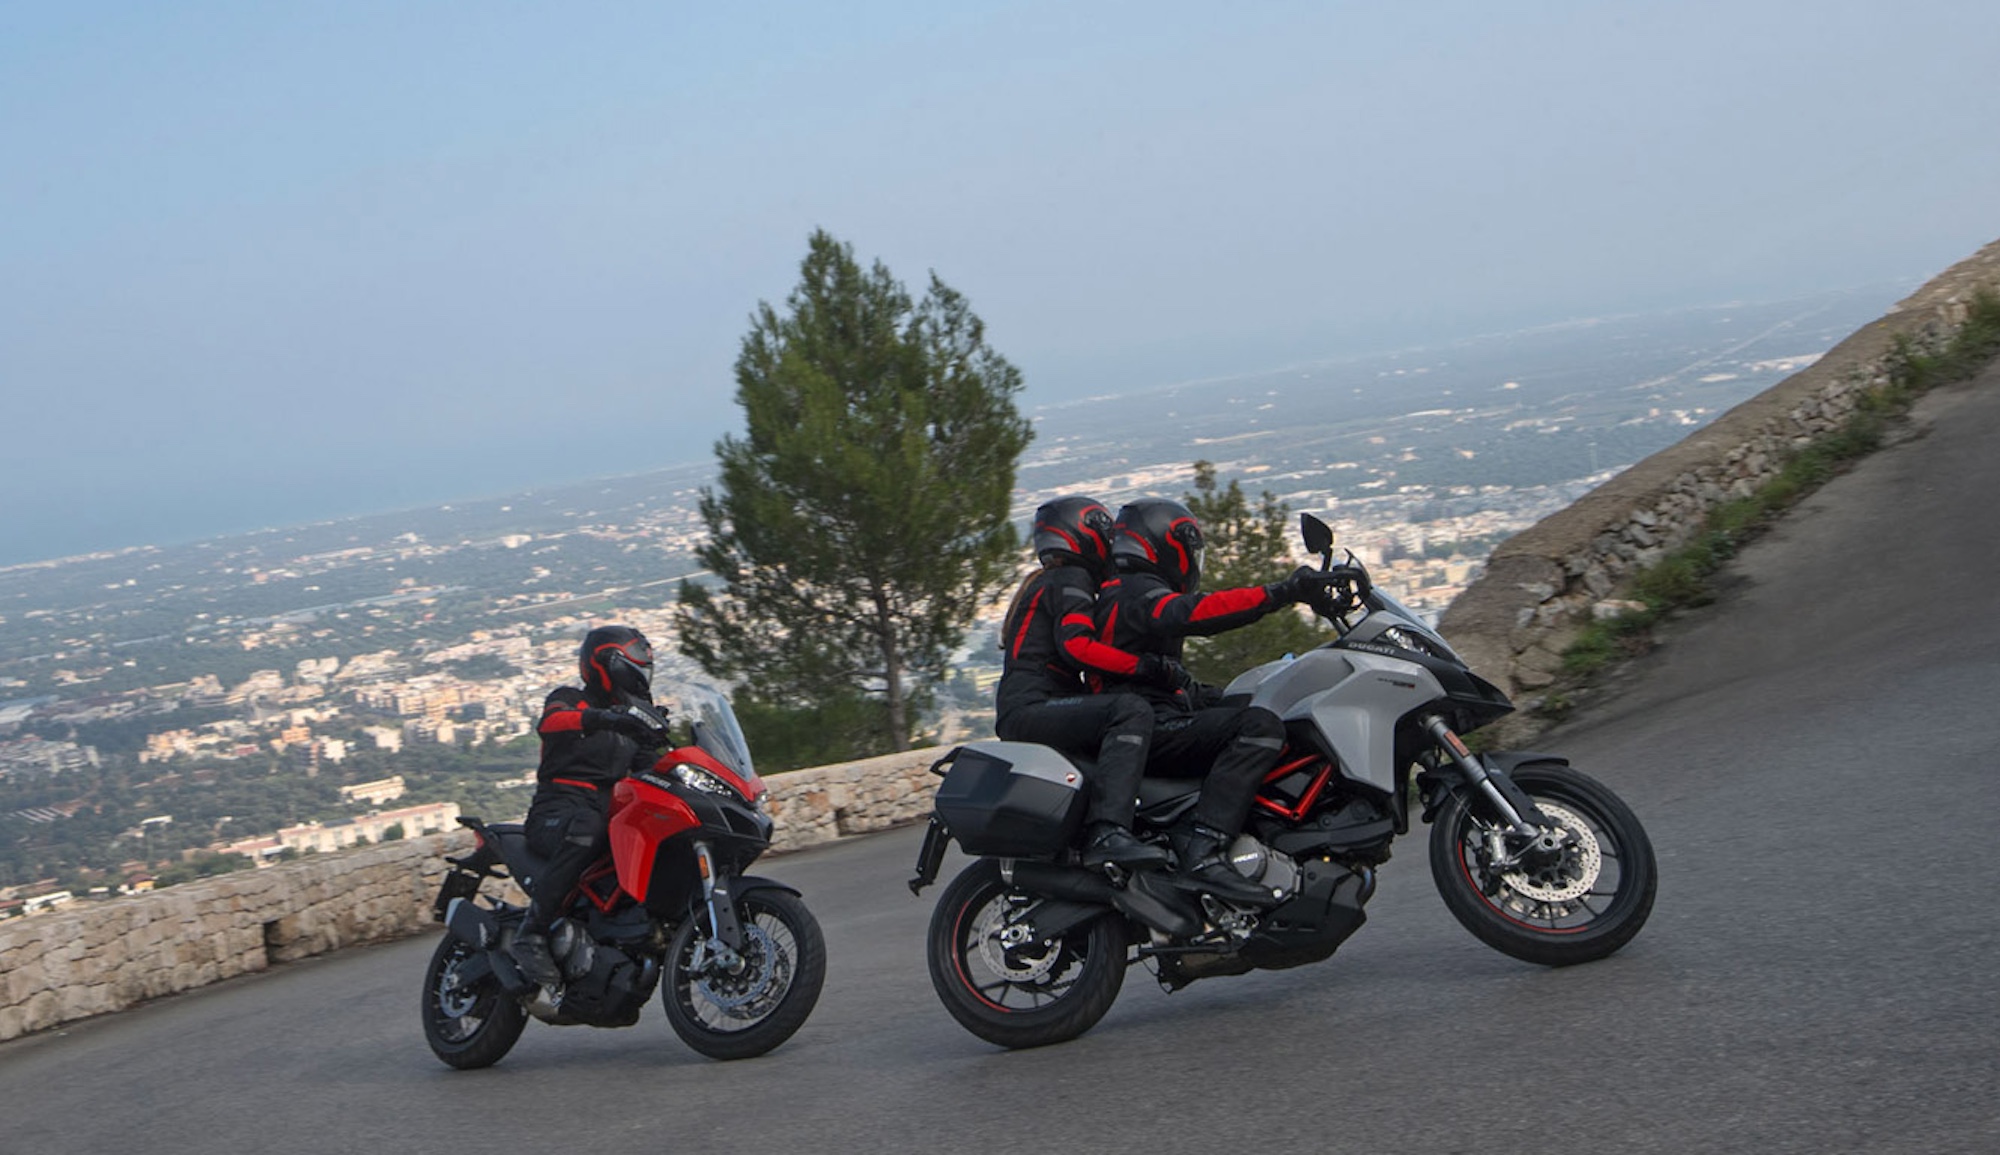 Two motorcyclists on Ducati motorcycles.